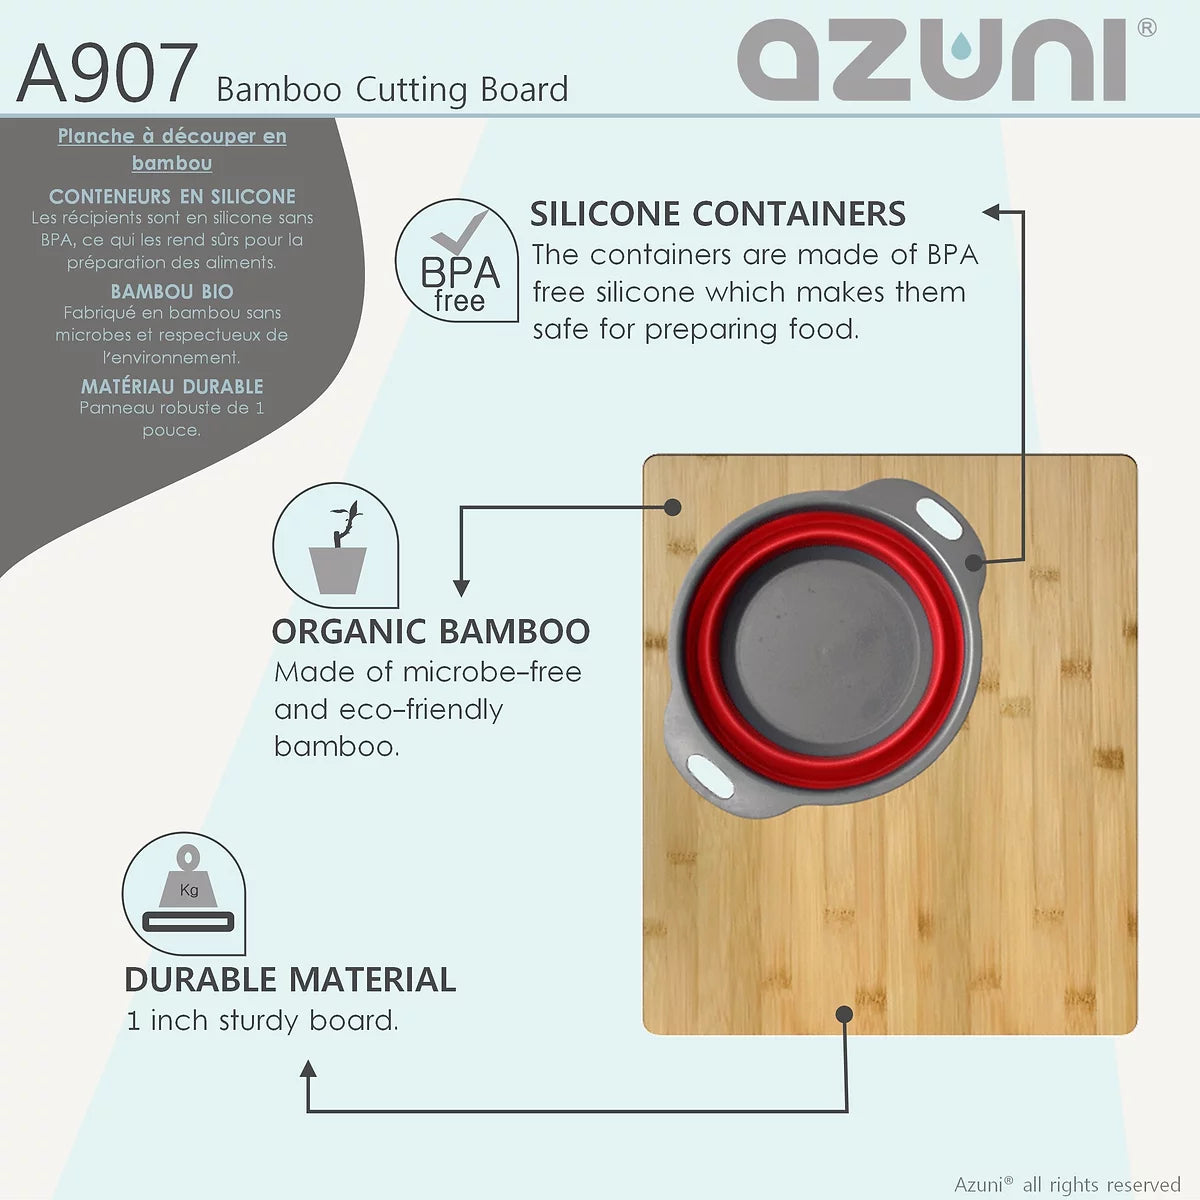 Azuni 16" Bamboo Cutting Board With Colander and Bowl Set A907